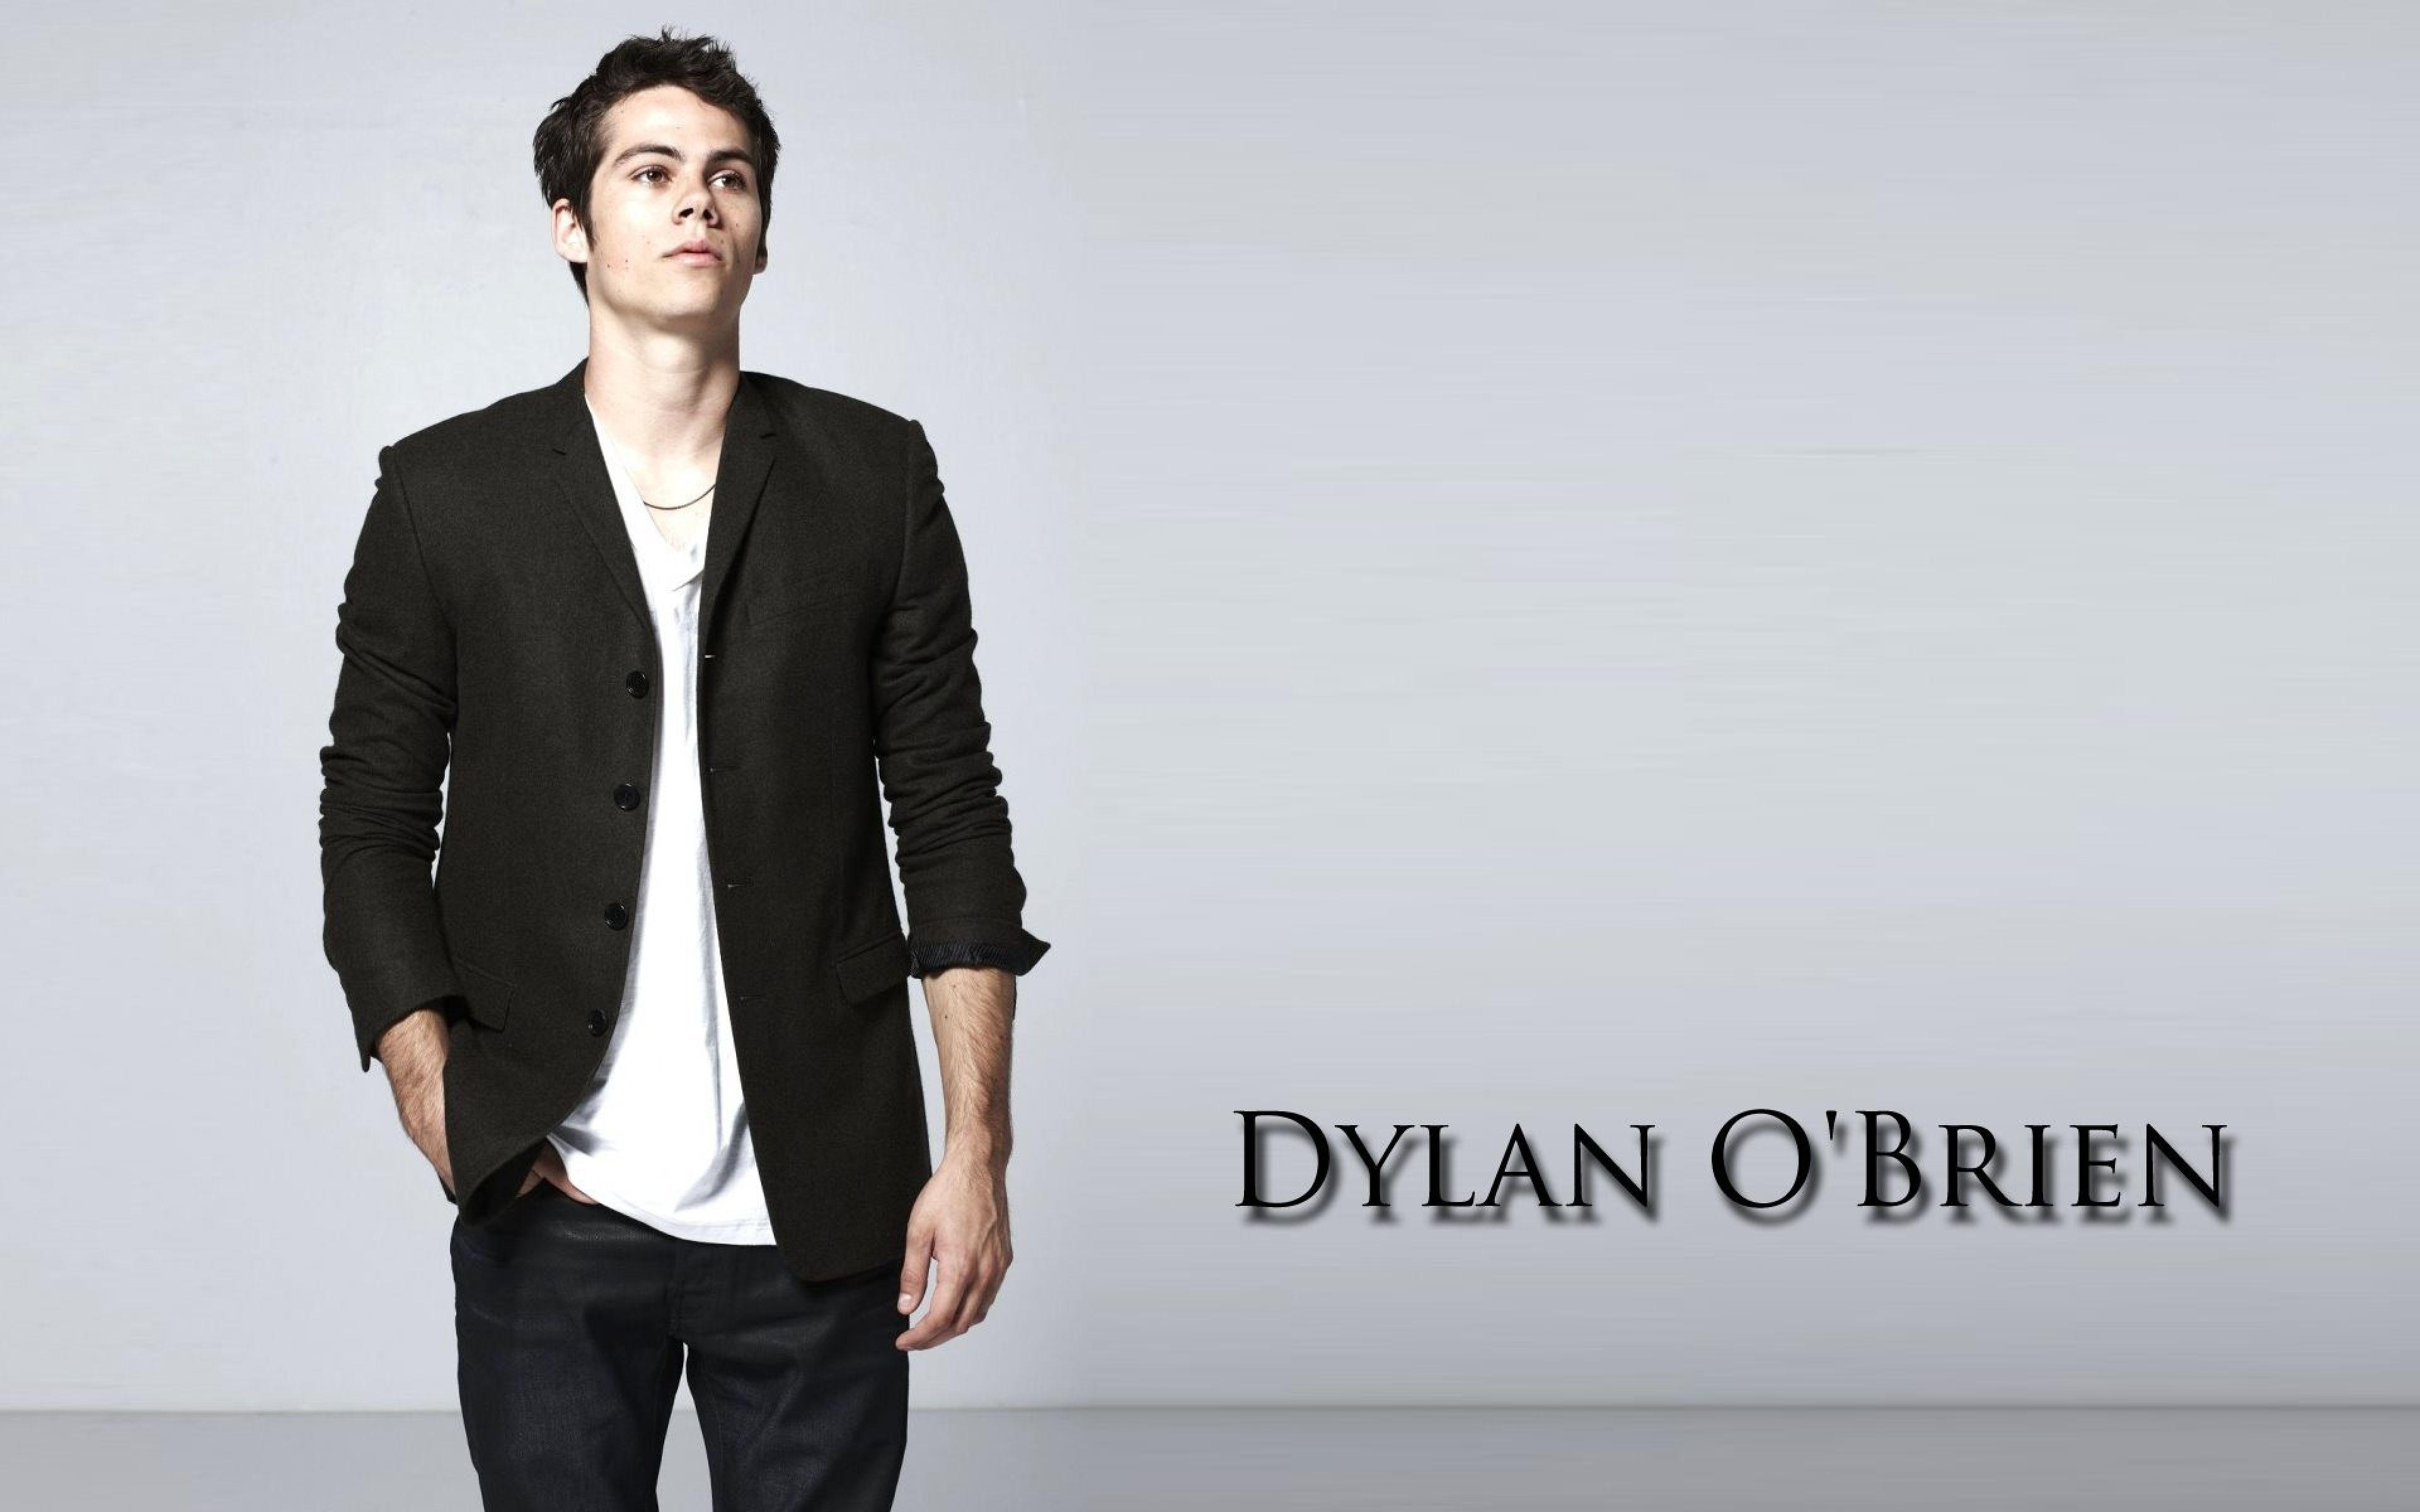 o brien background free download